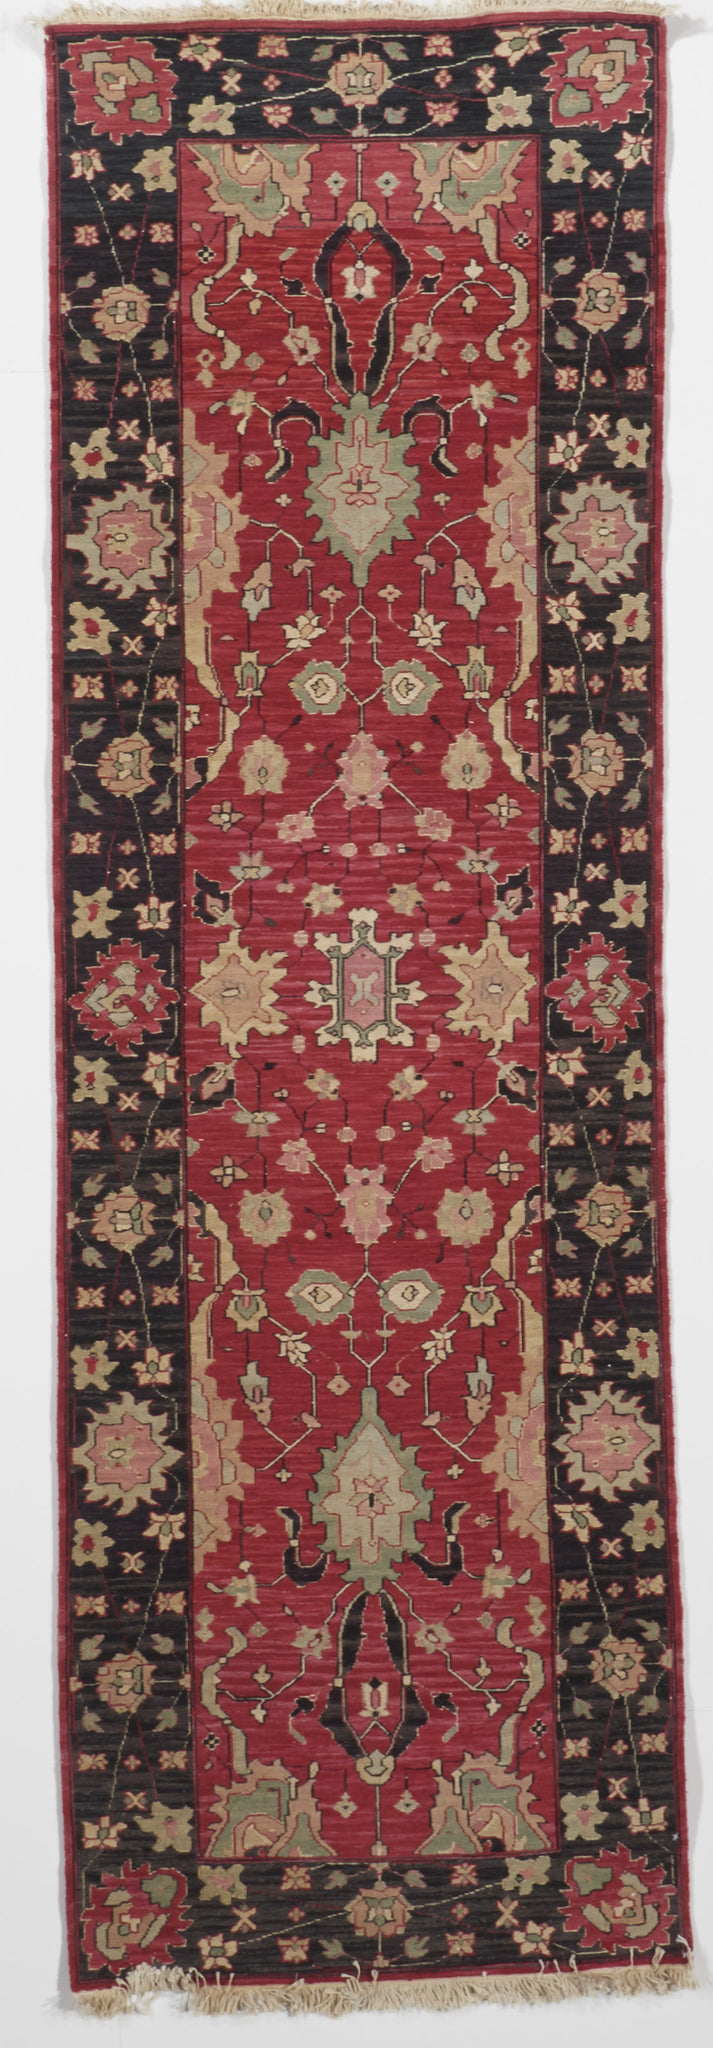 Traditional Hand Knotted Red Black Runner Rug 2'6 x 8' - IGotYourRug